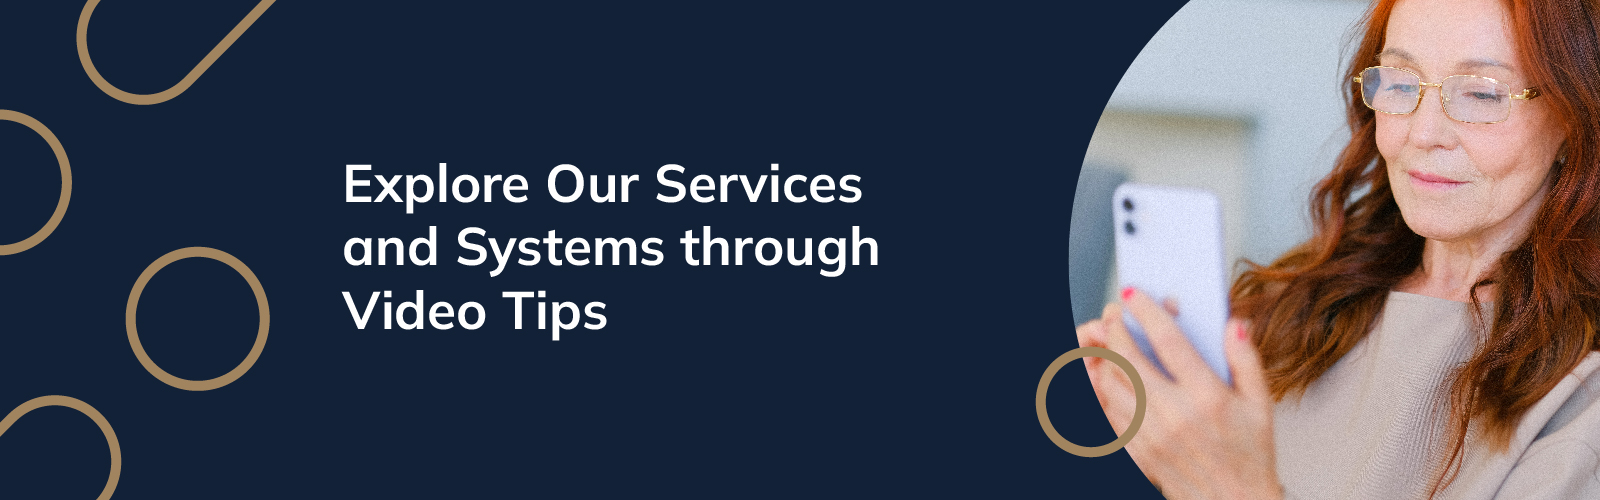 Explore Our Services and Systems through Video Tips